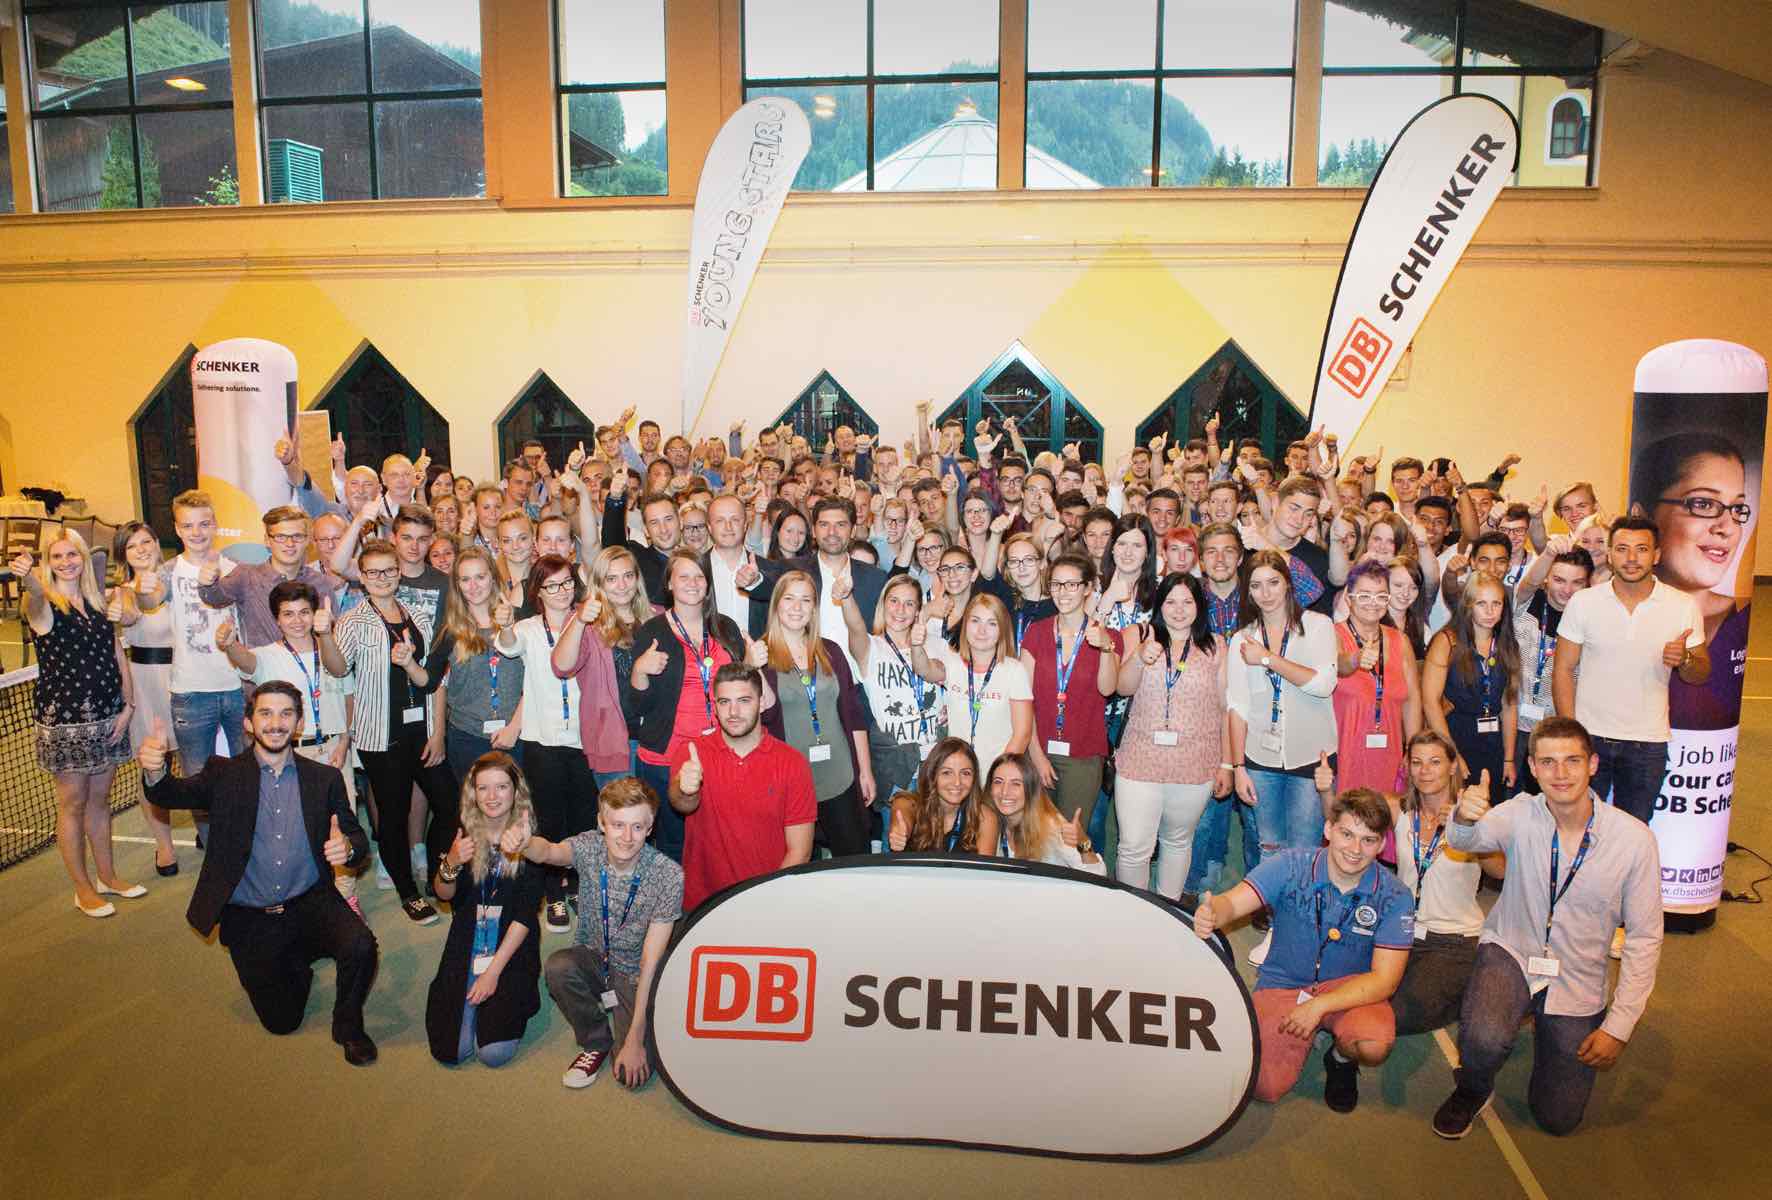 DB Schenker Austria continues to focus on the young generation